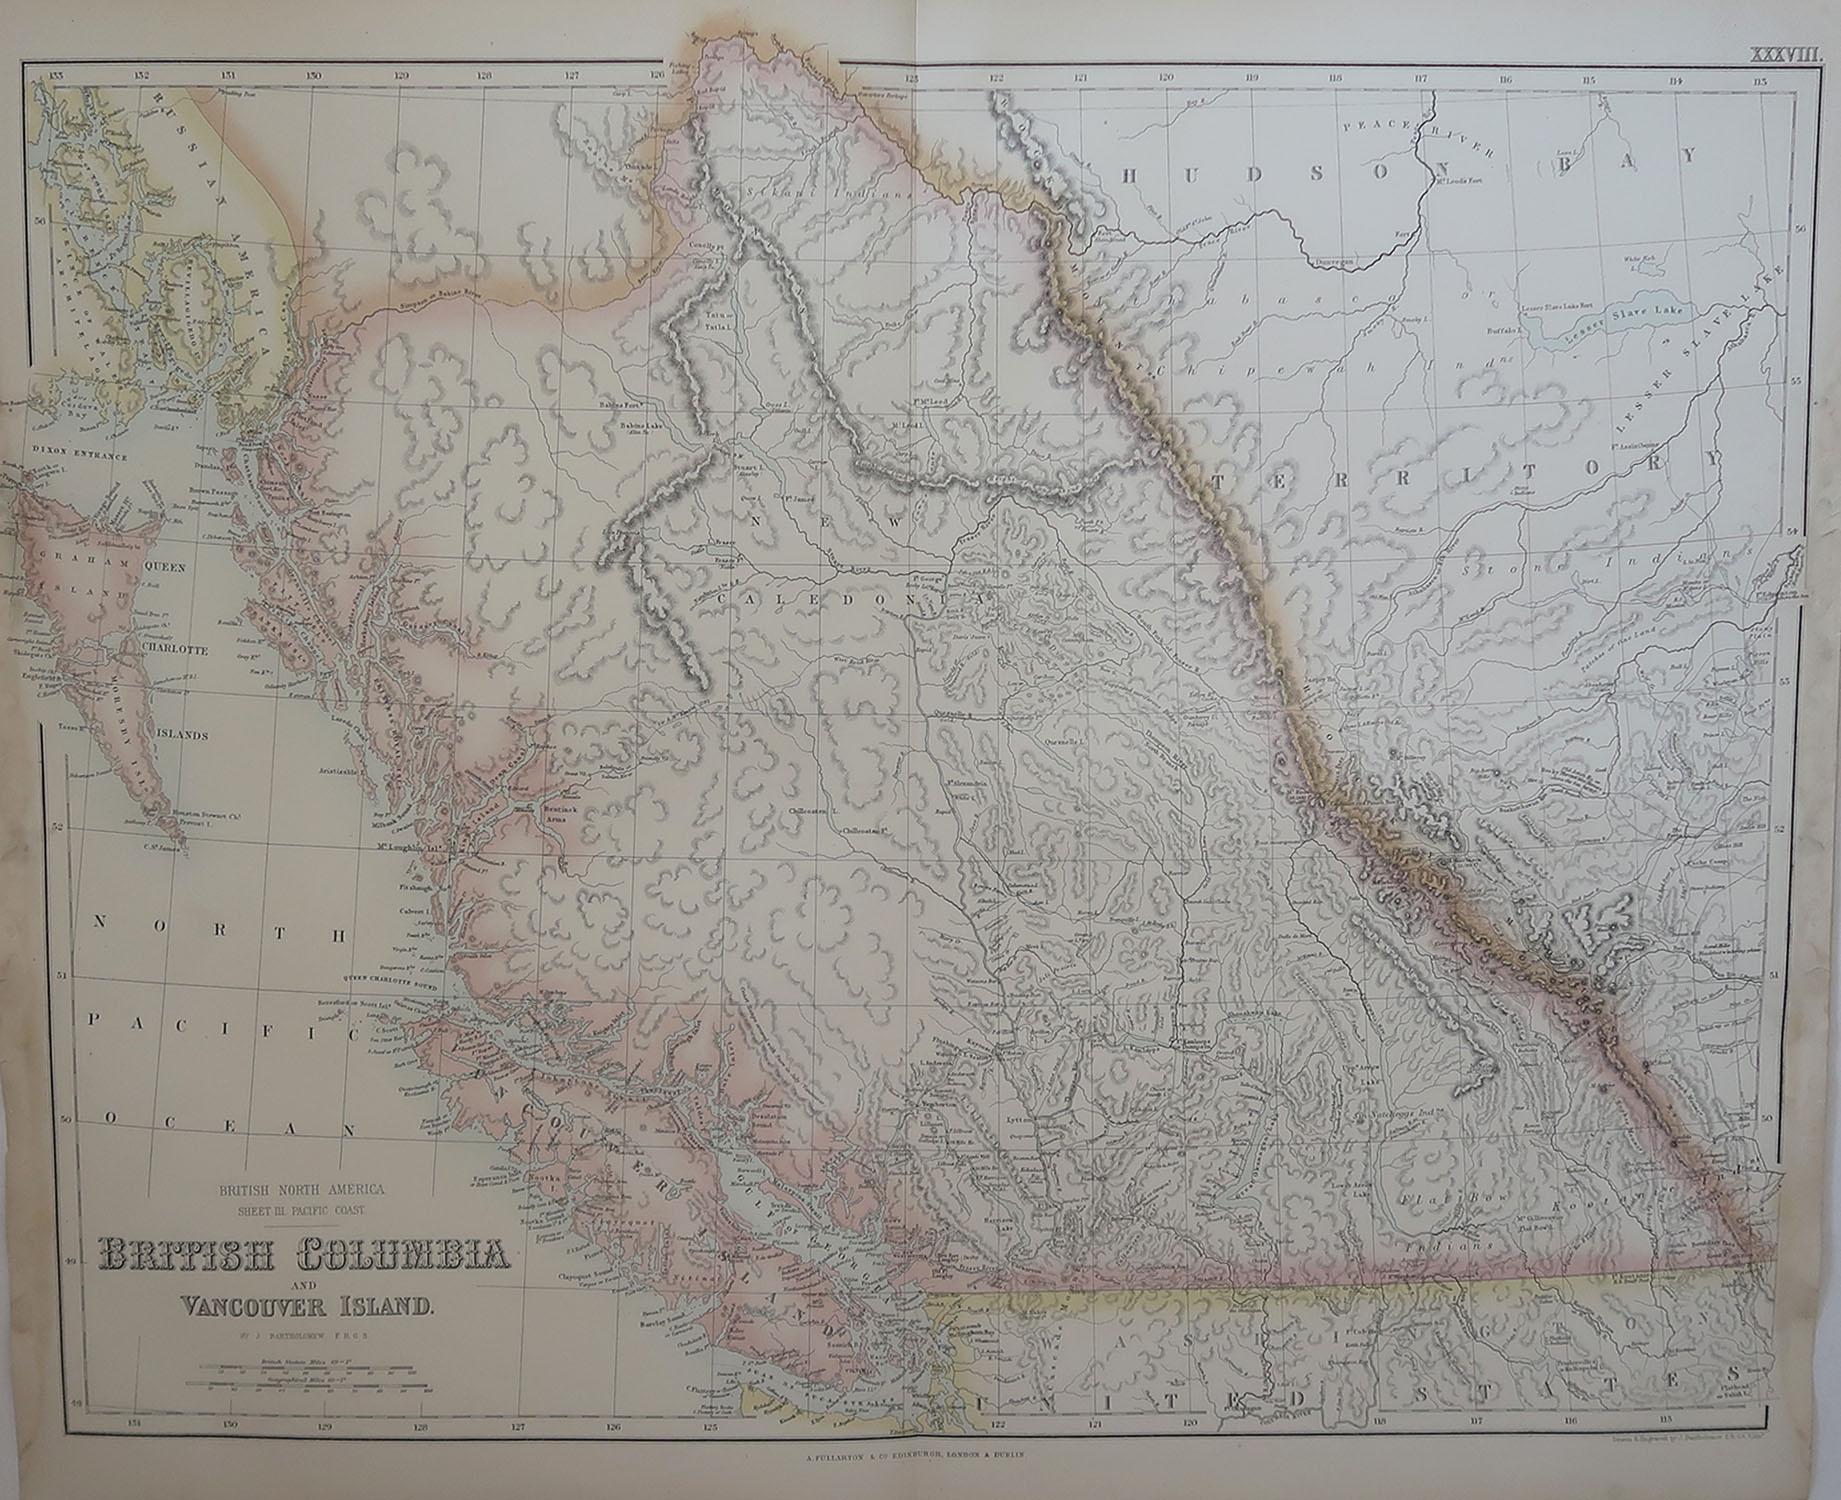 Great map of British Columbia

From the celebrated Royal Illustrated Atlas

Lithograph by Swanston. Original color. 

Published by Fullarton, Edinburgh. C.1870

Repairs to minor edge tears 

Unframed.












 